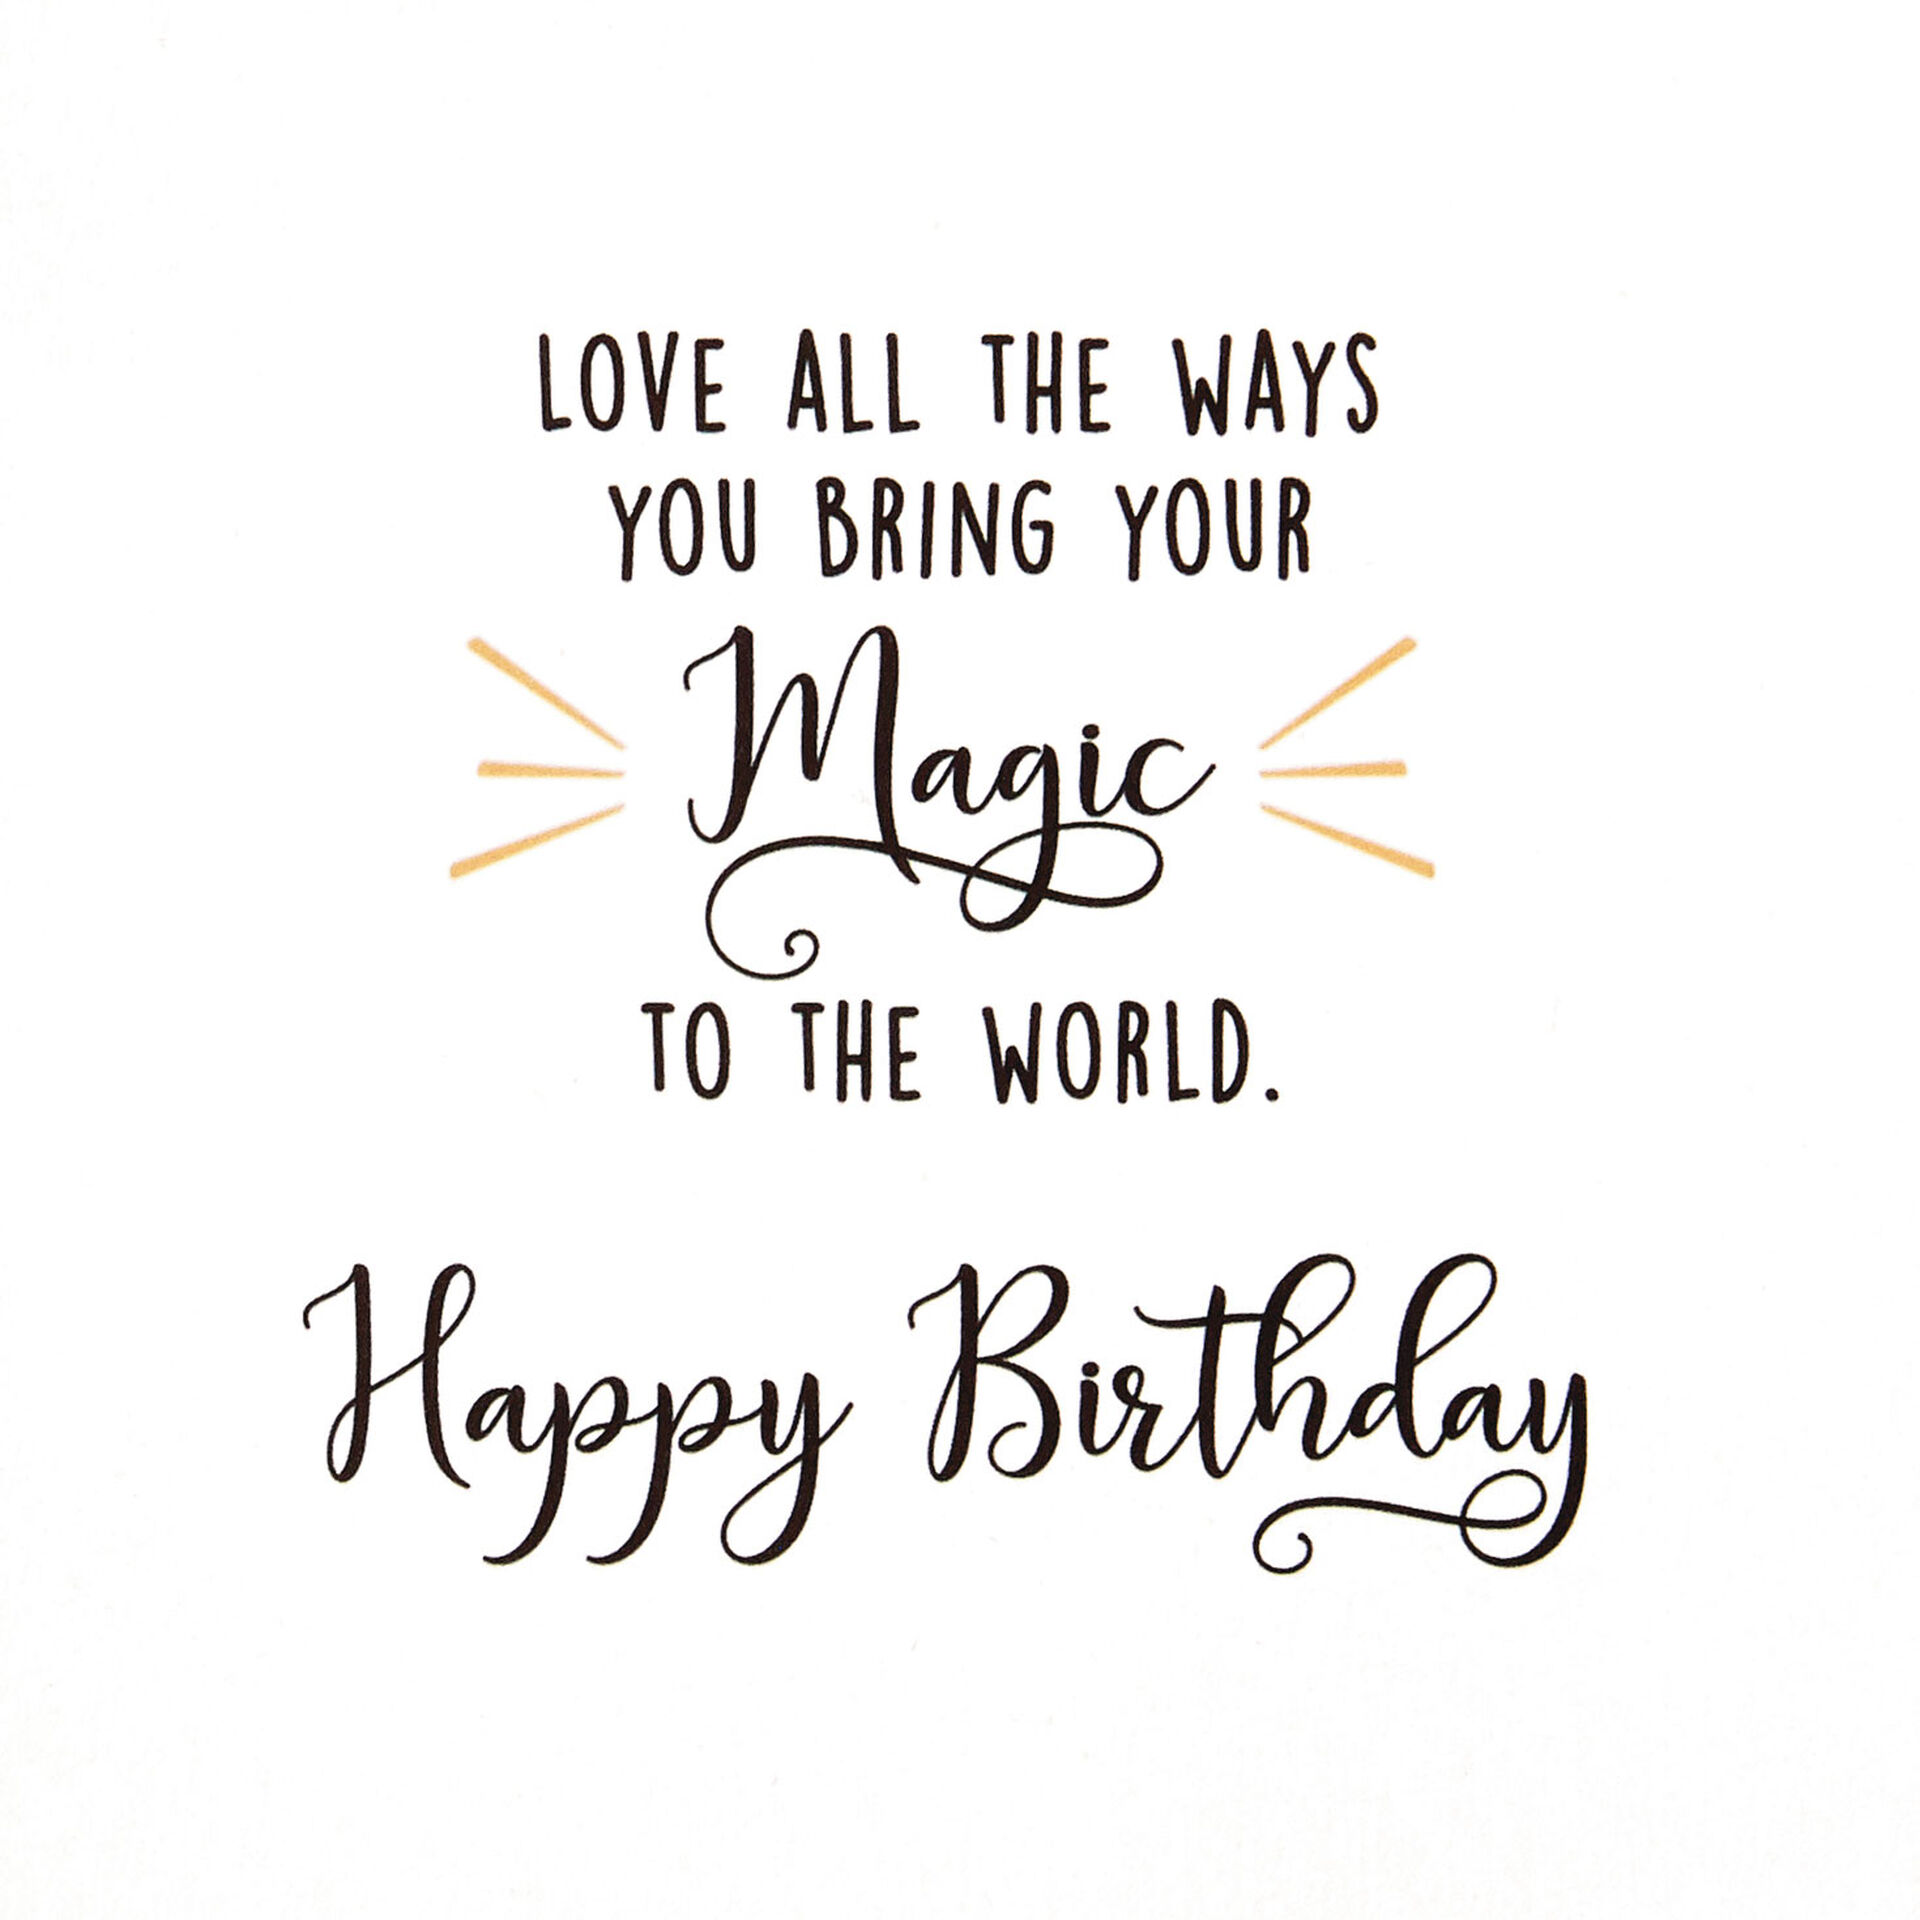 Gold-Sparkling-Crown-&-Stars-Birthday-Card-for-Her_499MHB1856_02